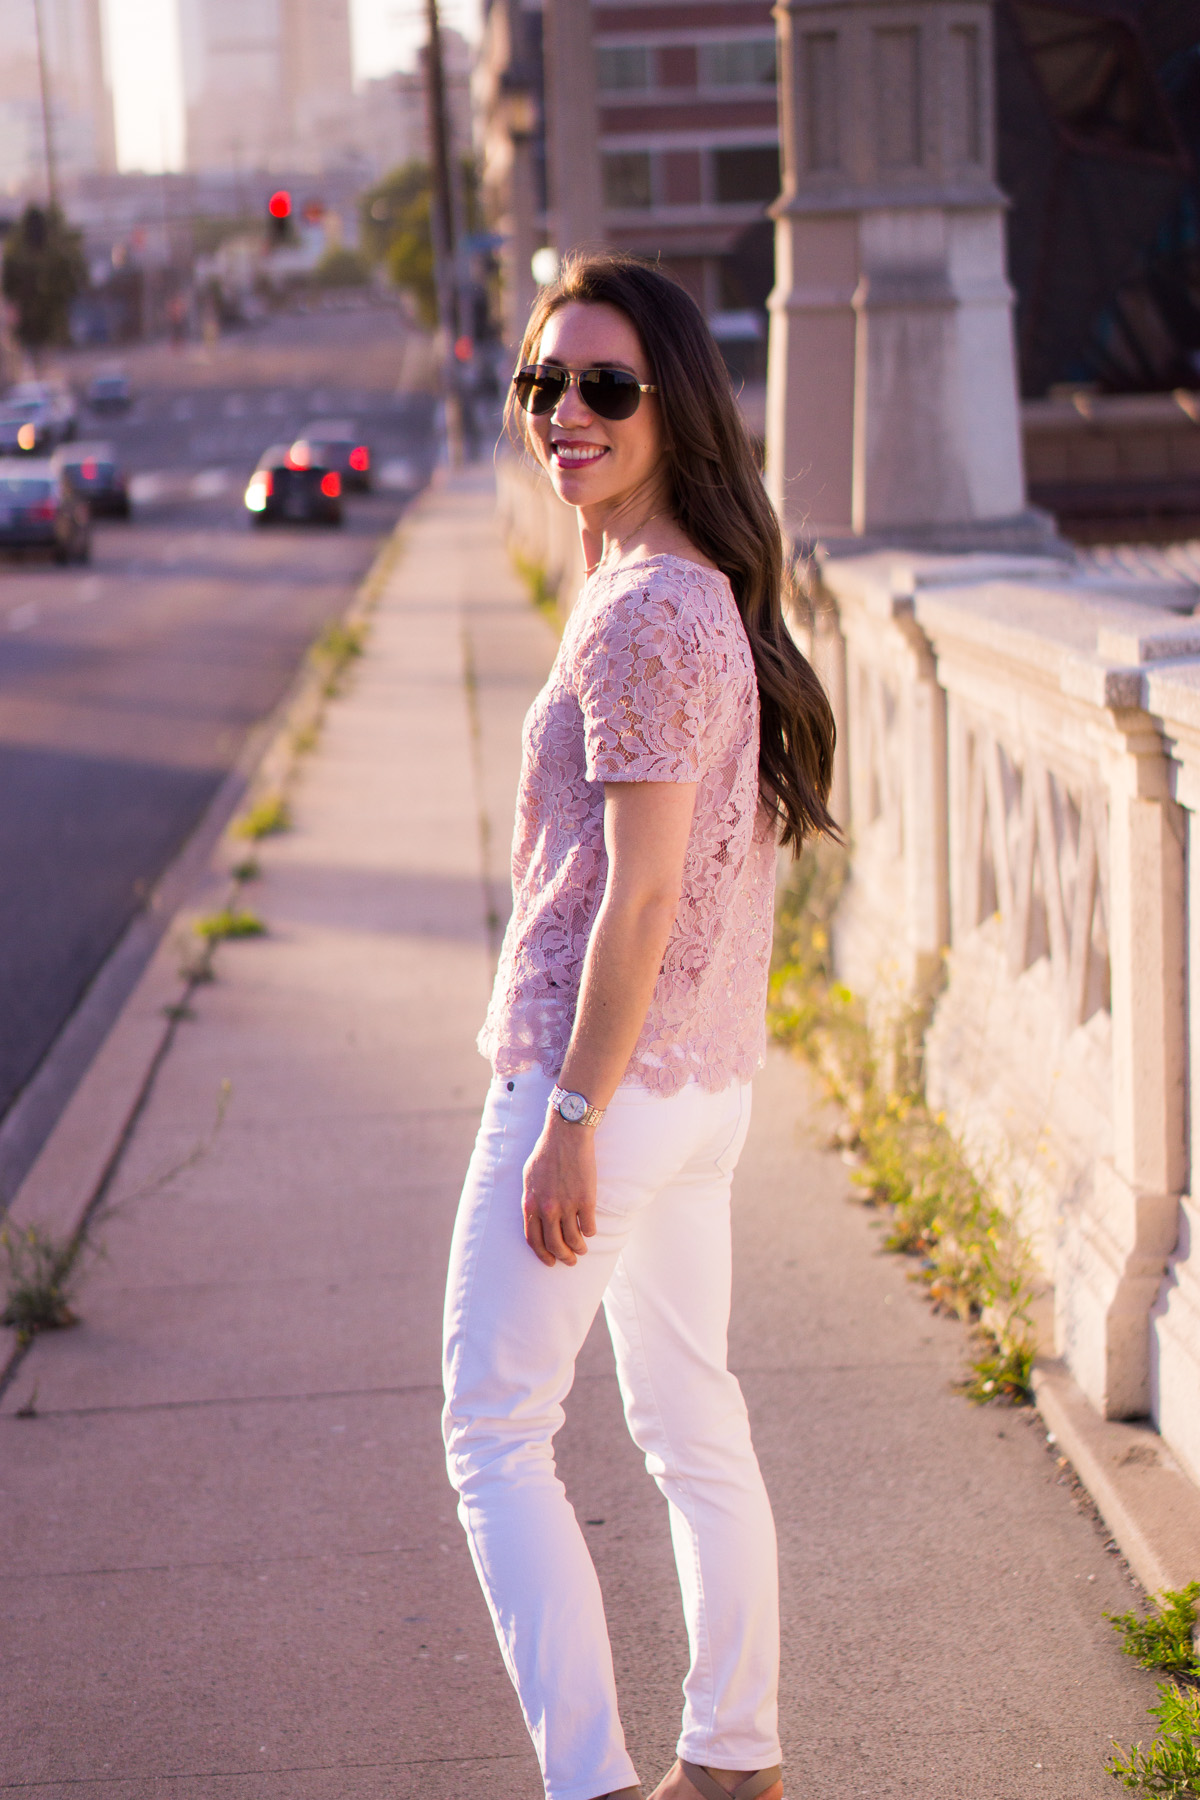 Lace tops are wardrobe essentials | Best Lace Tops | 5 Reasons to Wear Lace Tops | Petite Fashion & style | Why I love lace | Ann Taylor lace tee top | LOFT lace | Loft camisole | clean cami | Tory Burch logo belt | Paige white denim